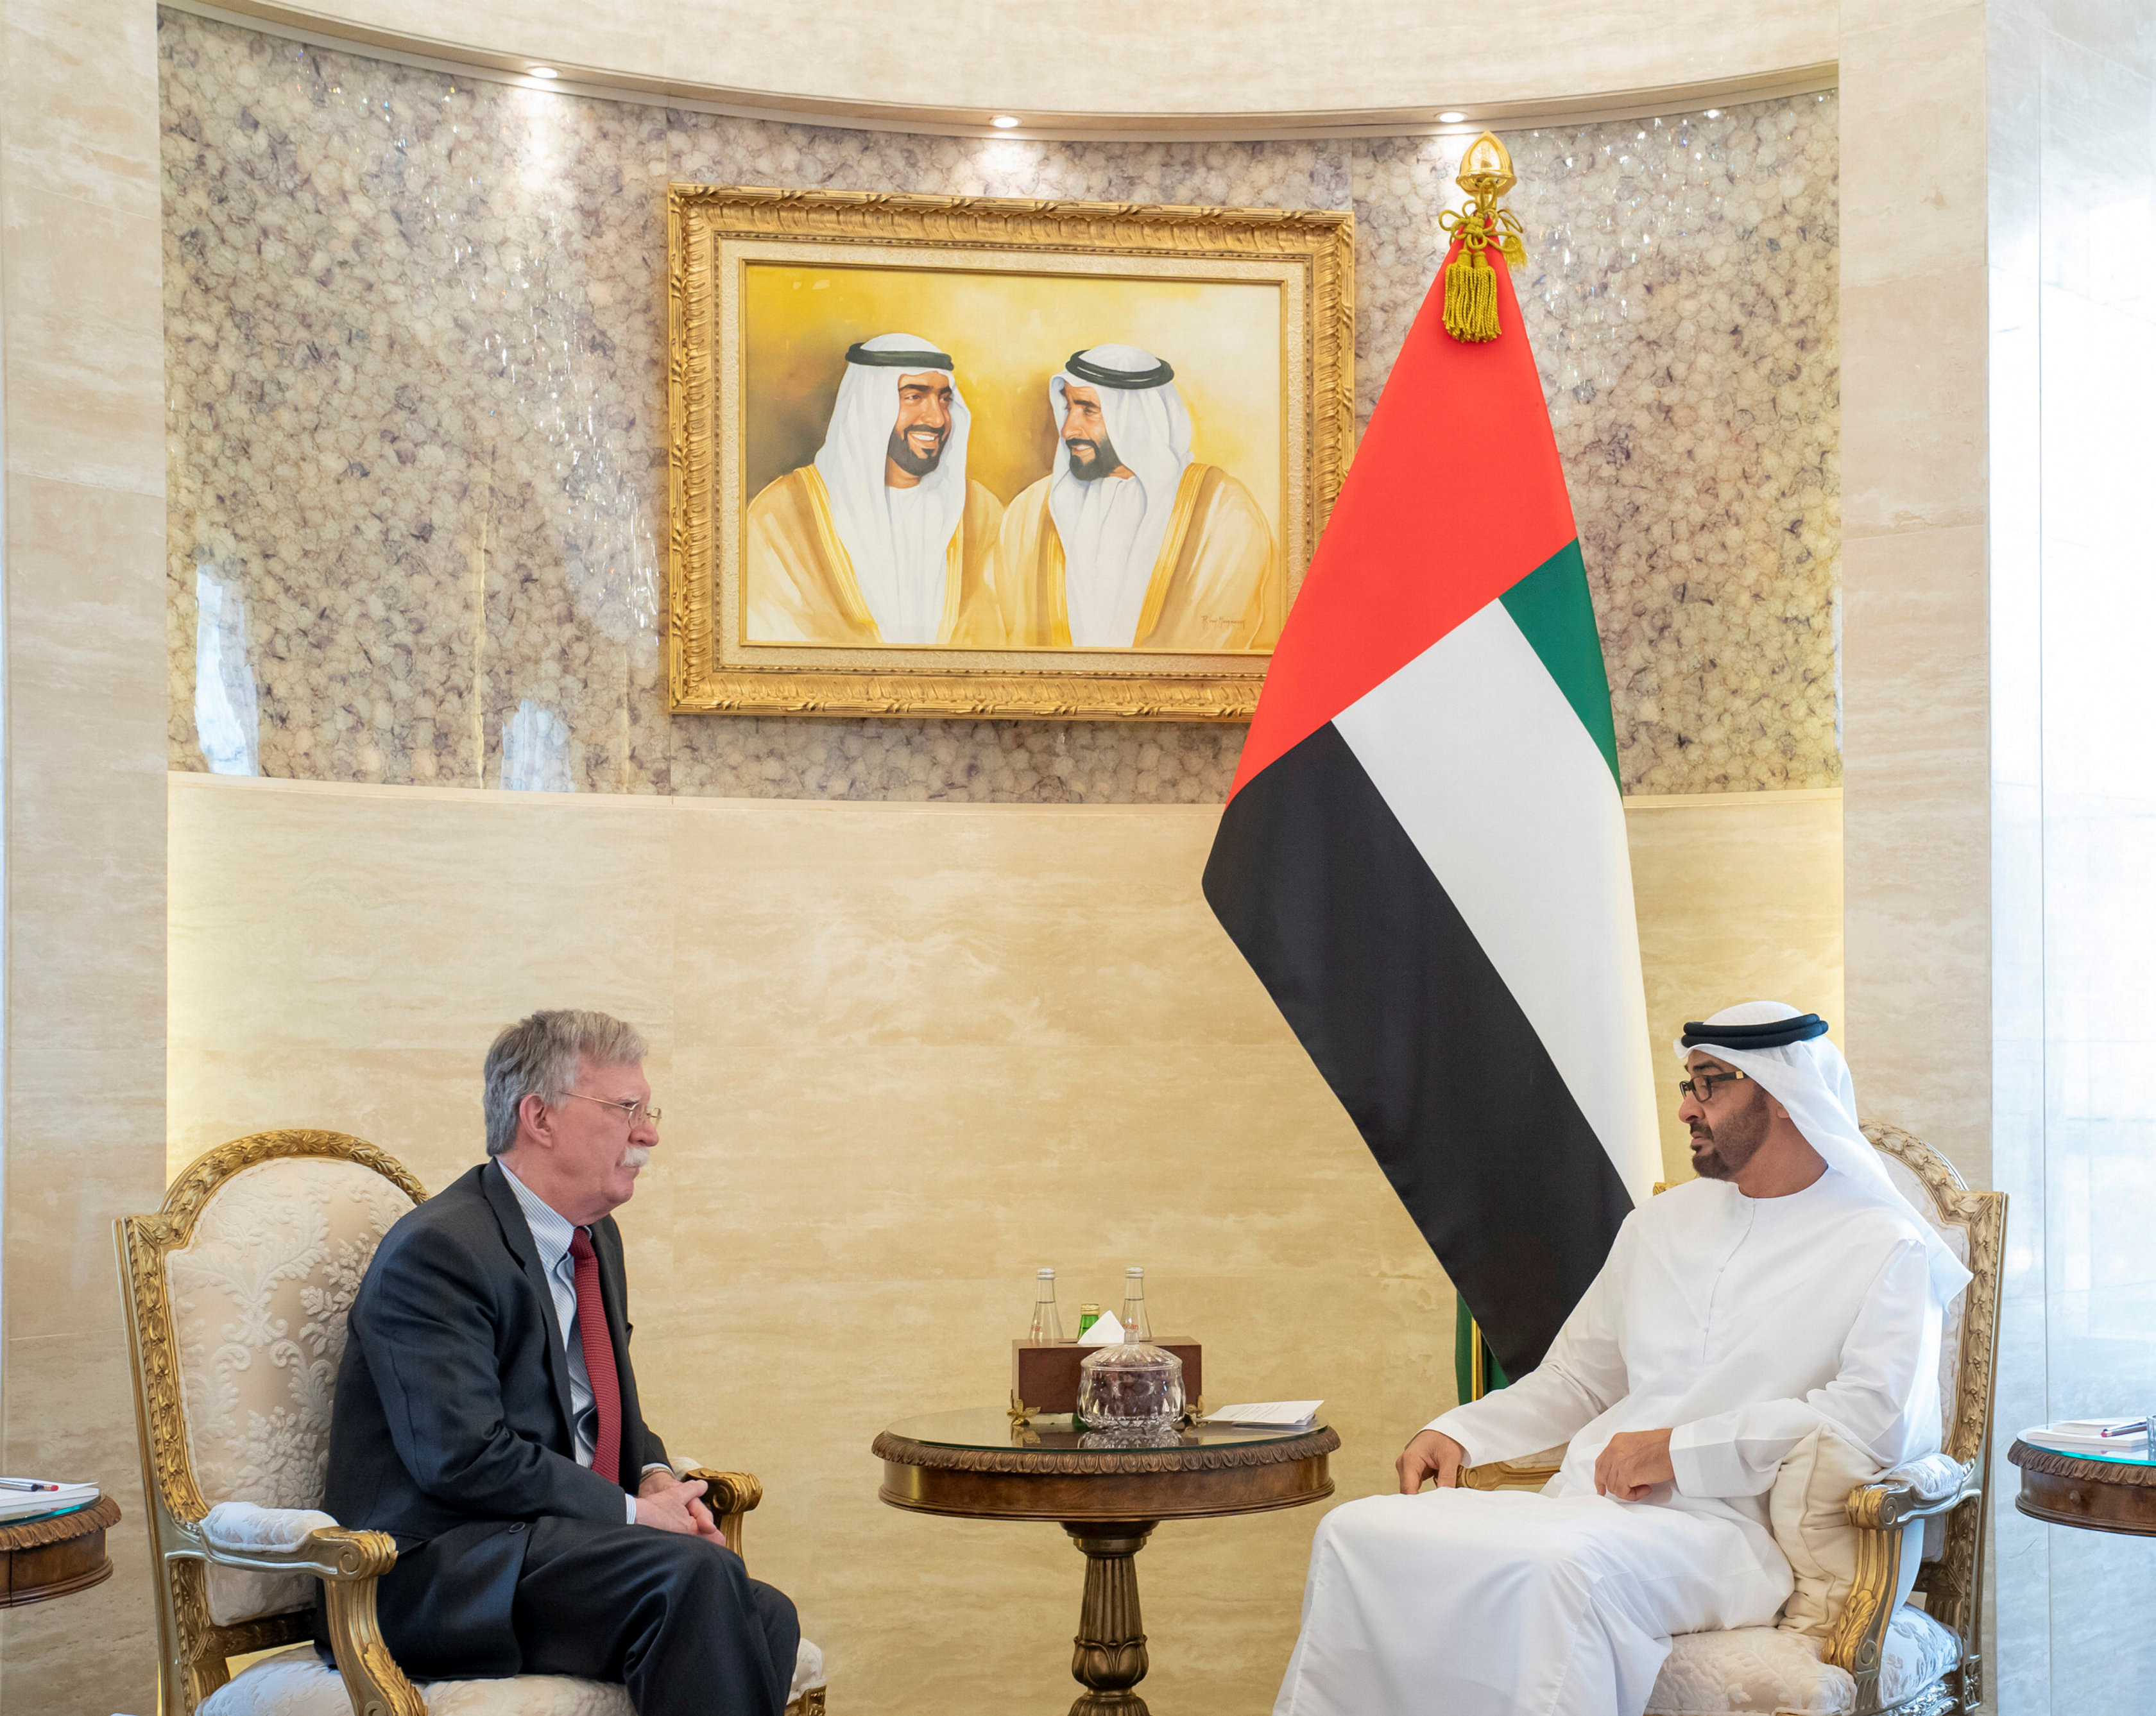 Abu Dhabi's Crown Prince Mohammed bin Zayed meets with US National Security Advisor John Bolton in Abu Dhabi (Reuters)